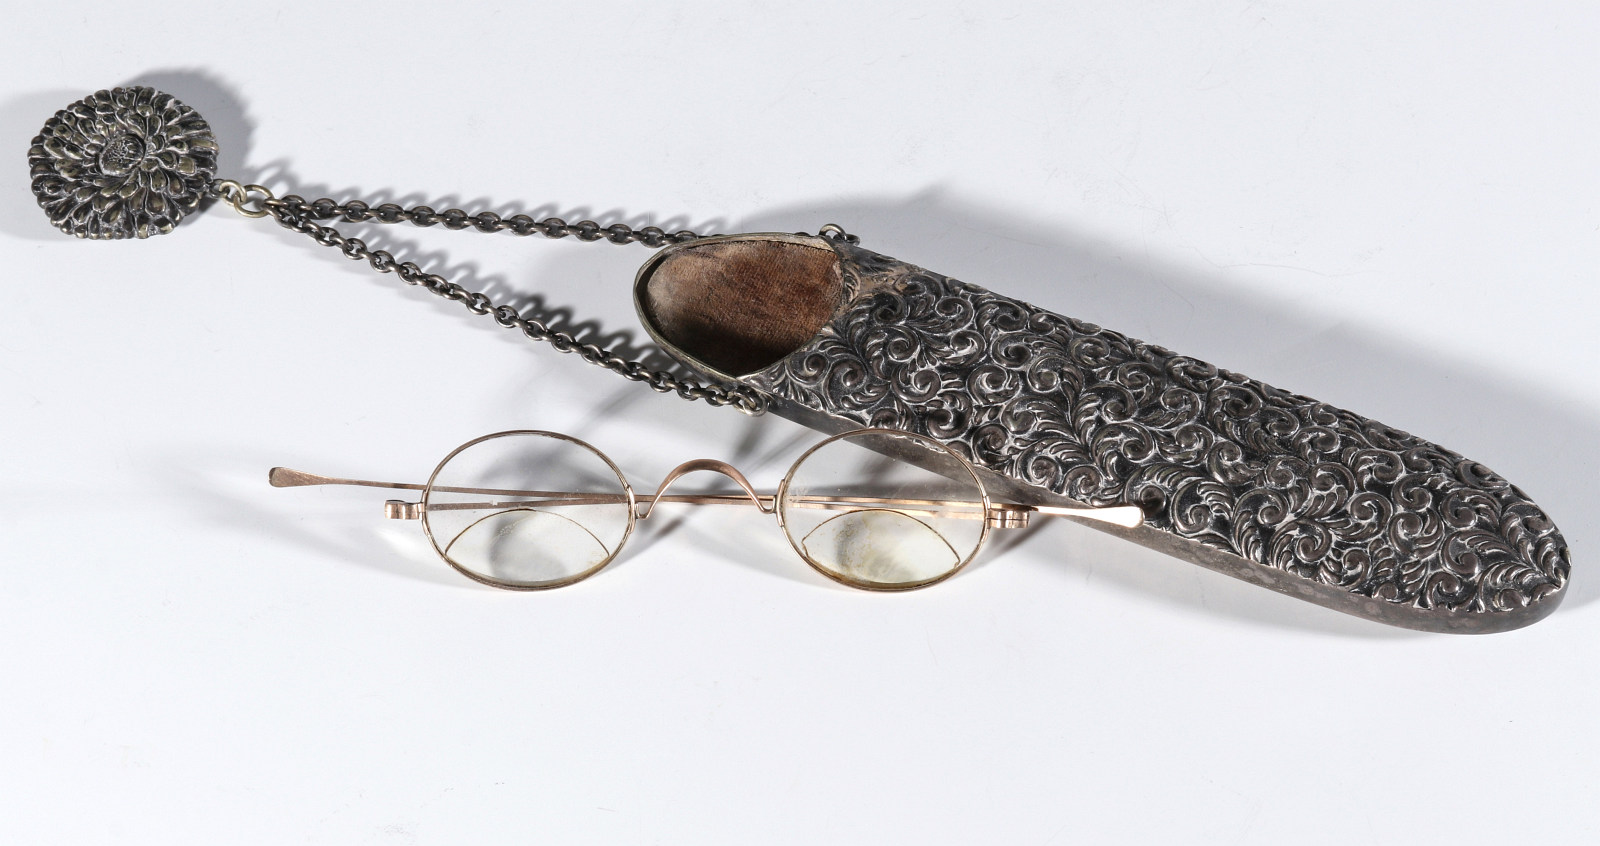 A VICTORIAN SILVER PLATED CHATELAINE EYEGLASS CASE